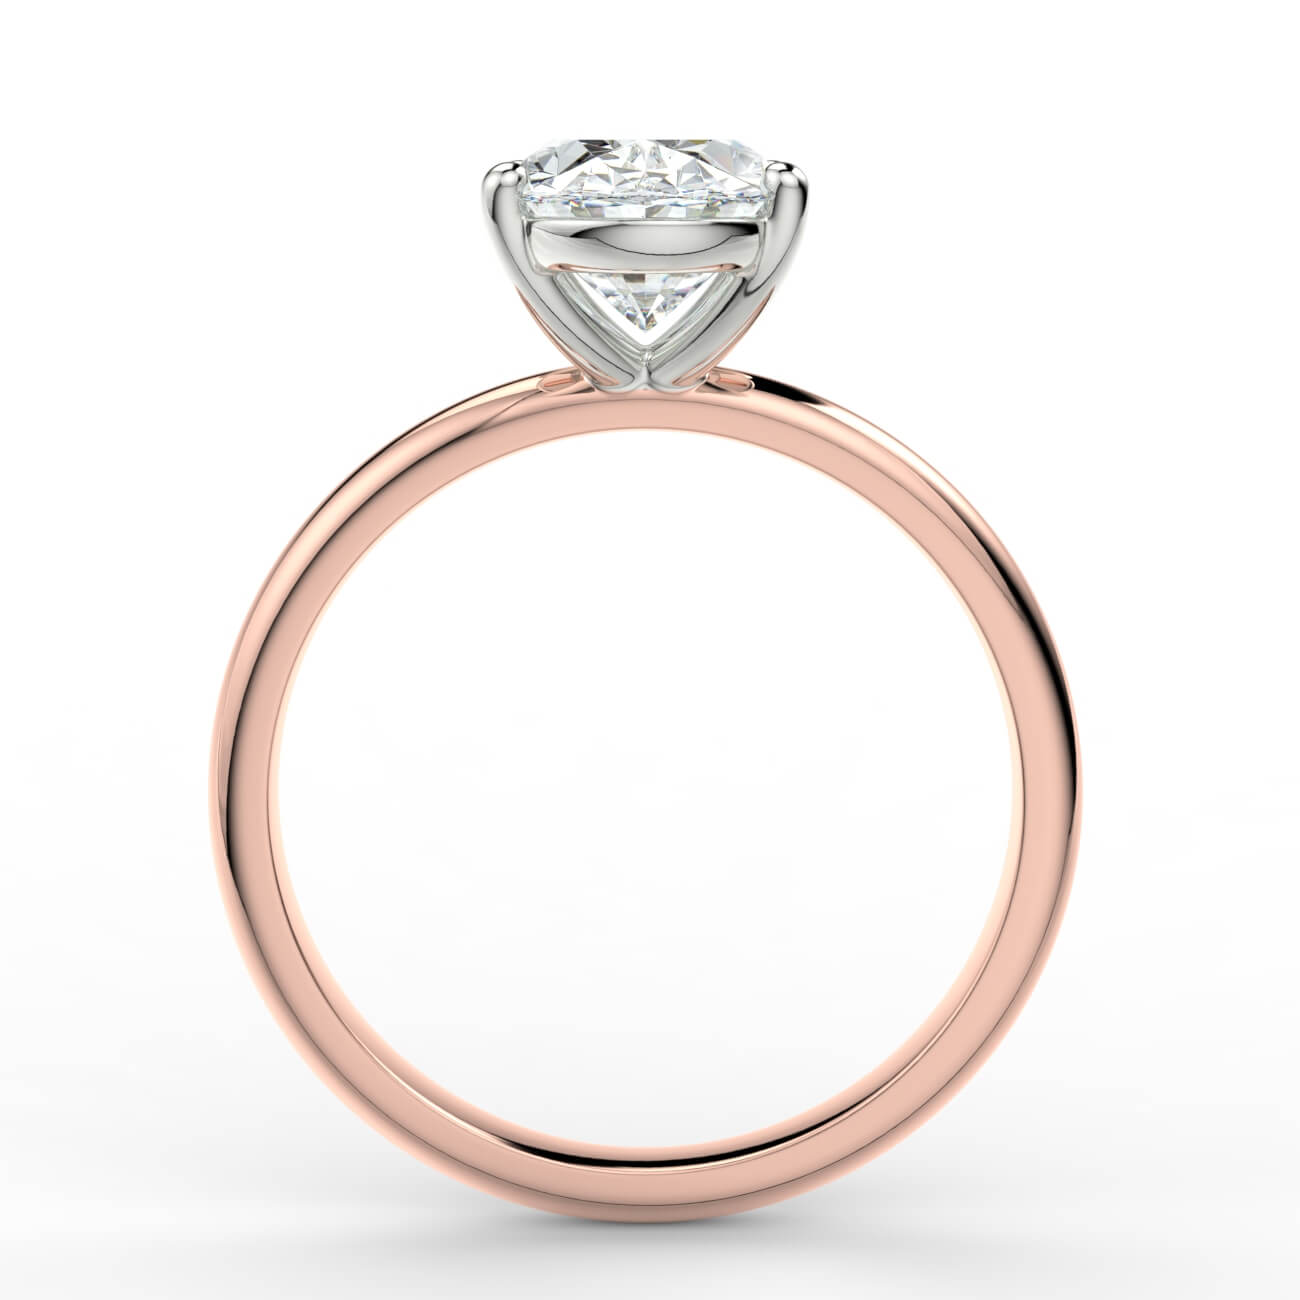 Comfort fit 4 claw oval solitaire diamond ring in rose and white gold – Australian Diamond Network